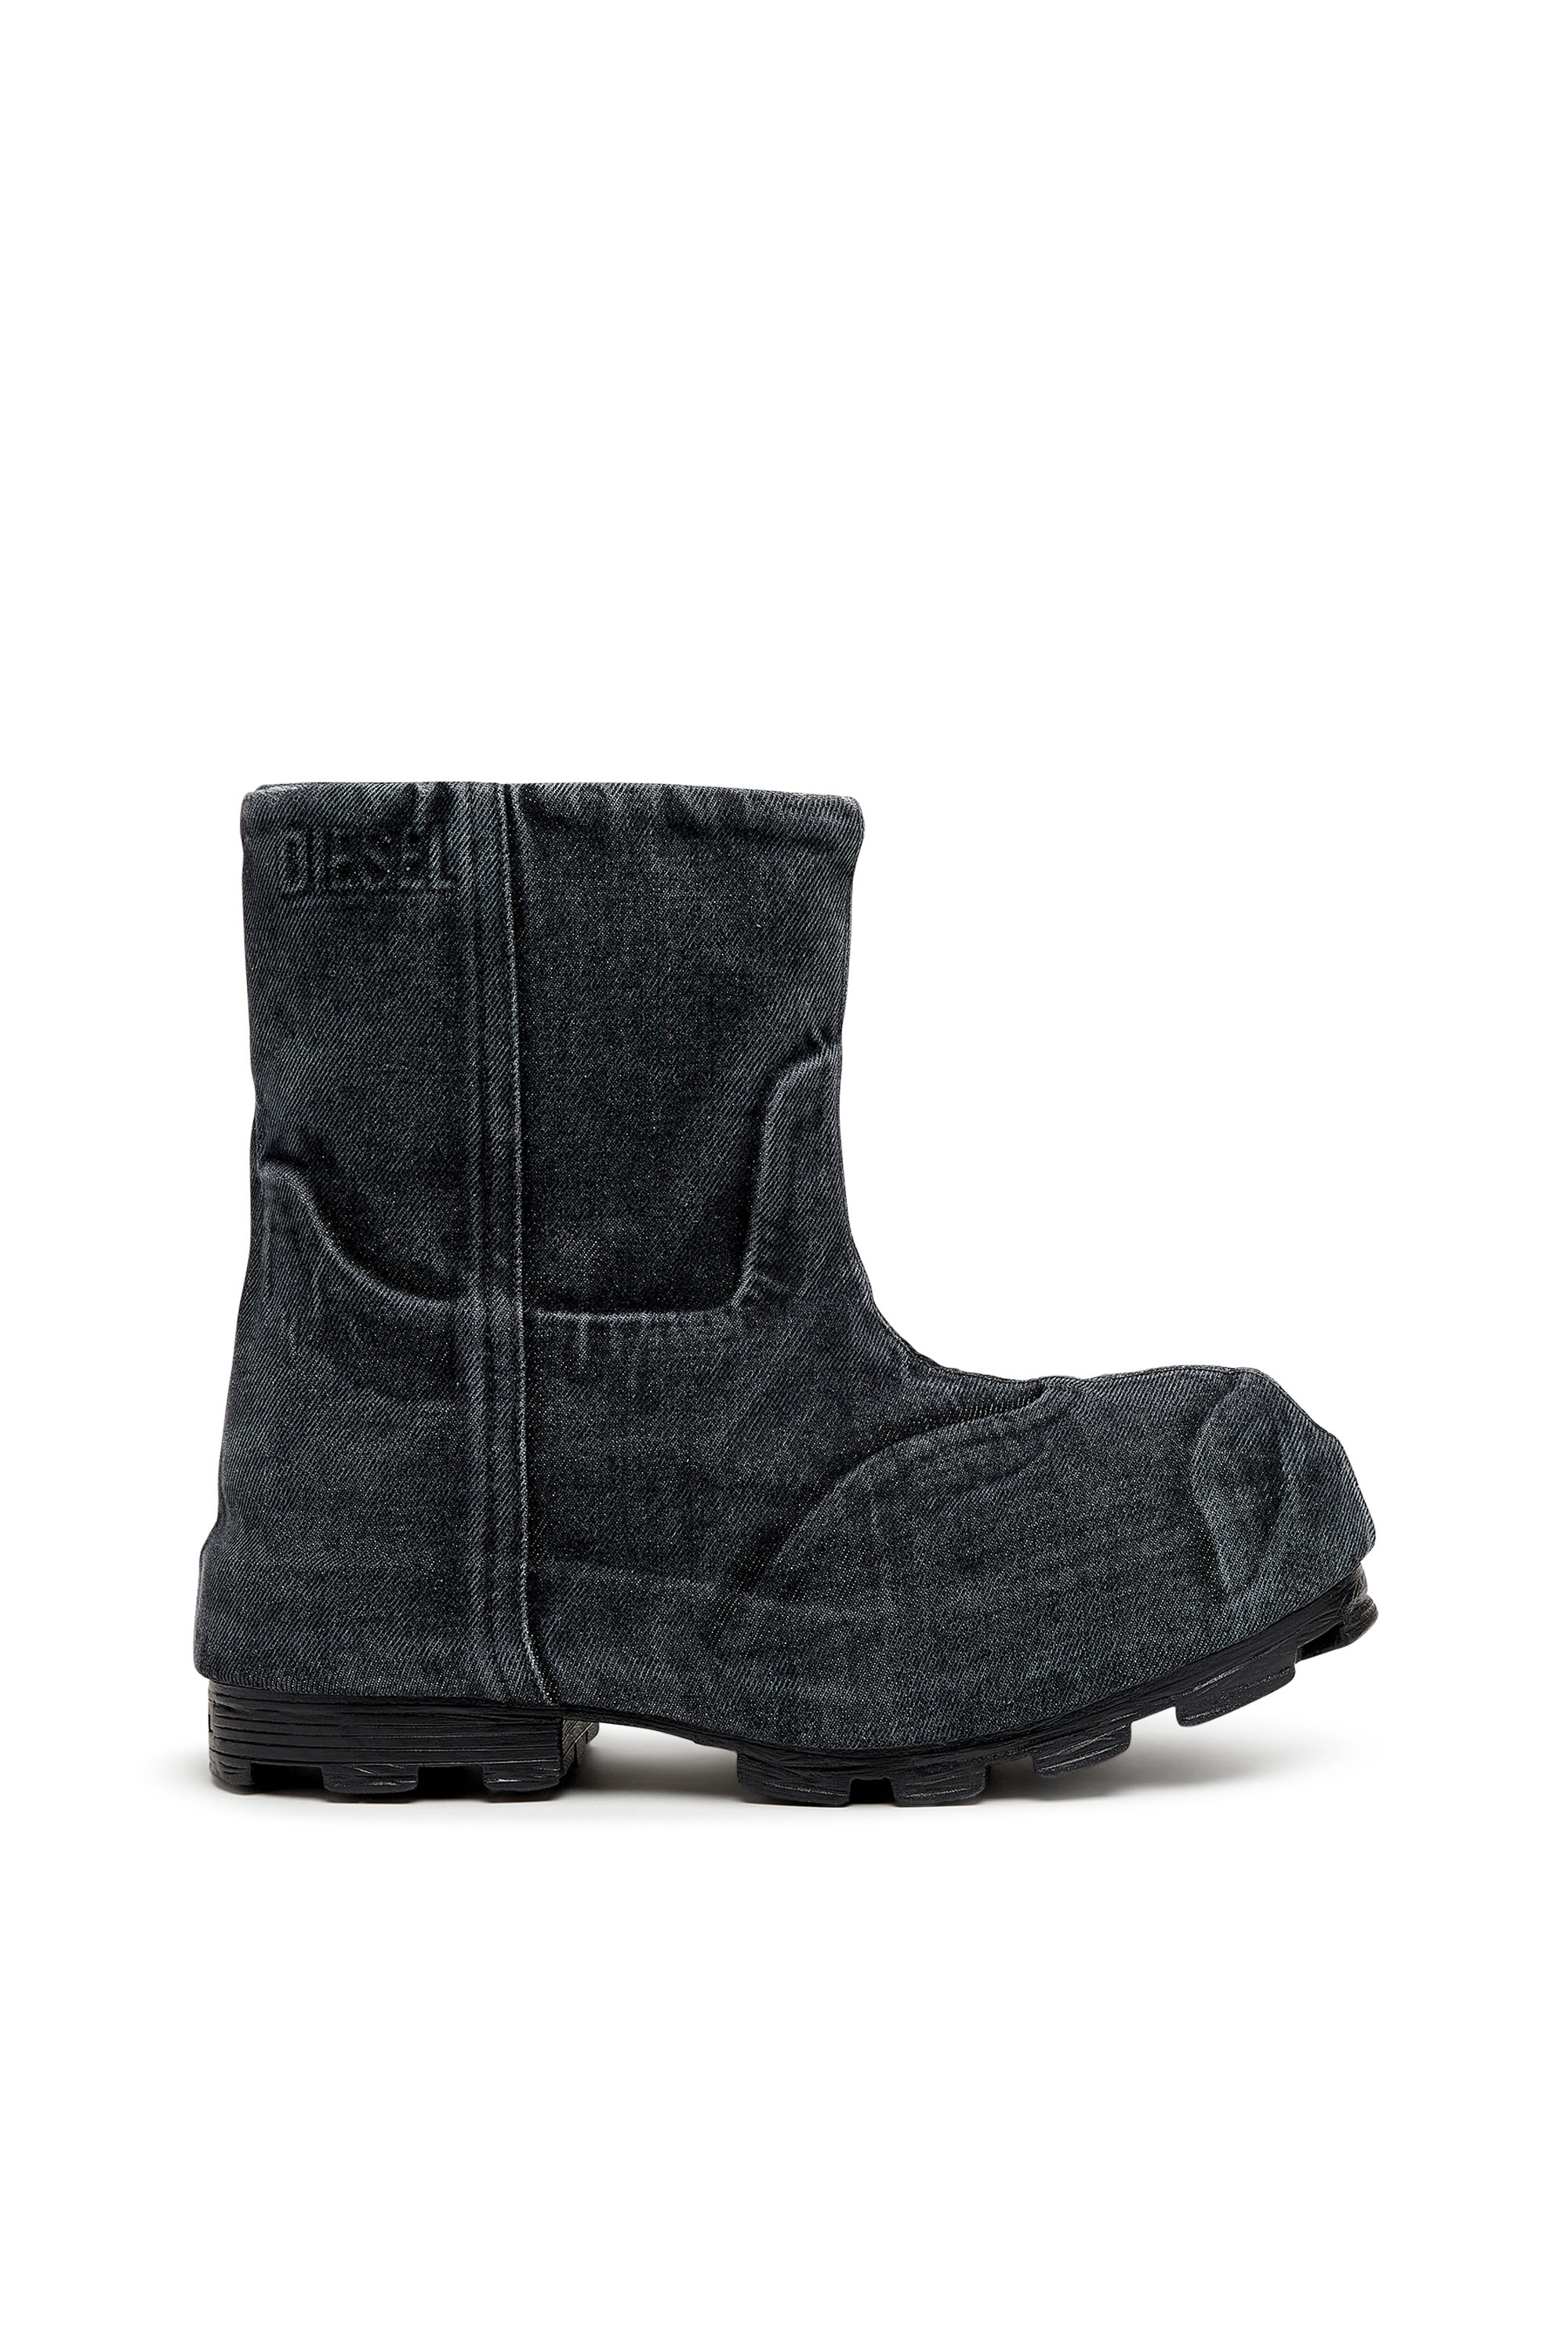 Diesel - D-Hammer Ch Md Boots - Chelsea boots in washed denim - Boots - Unisex - Black